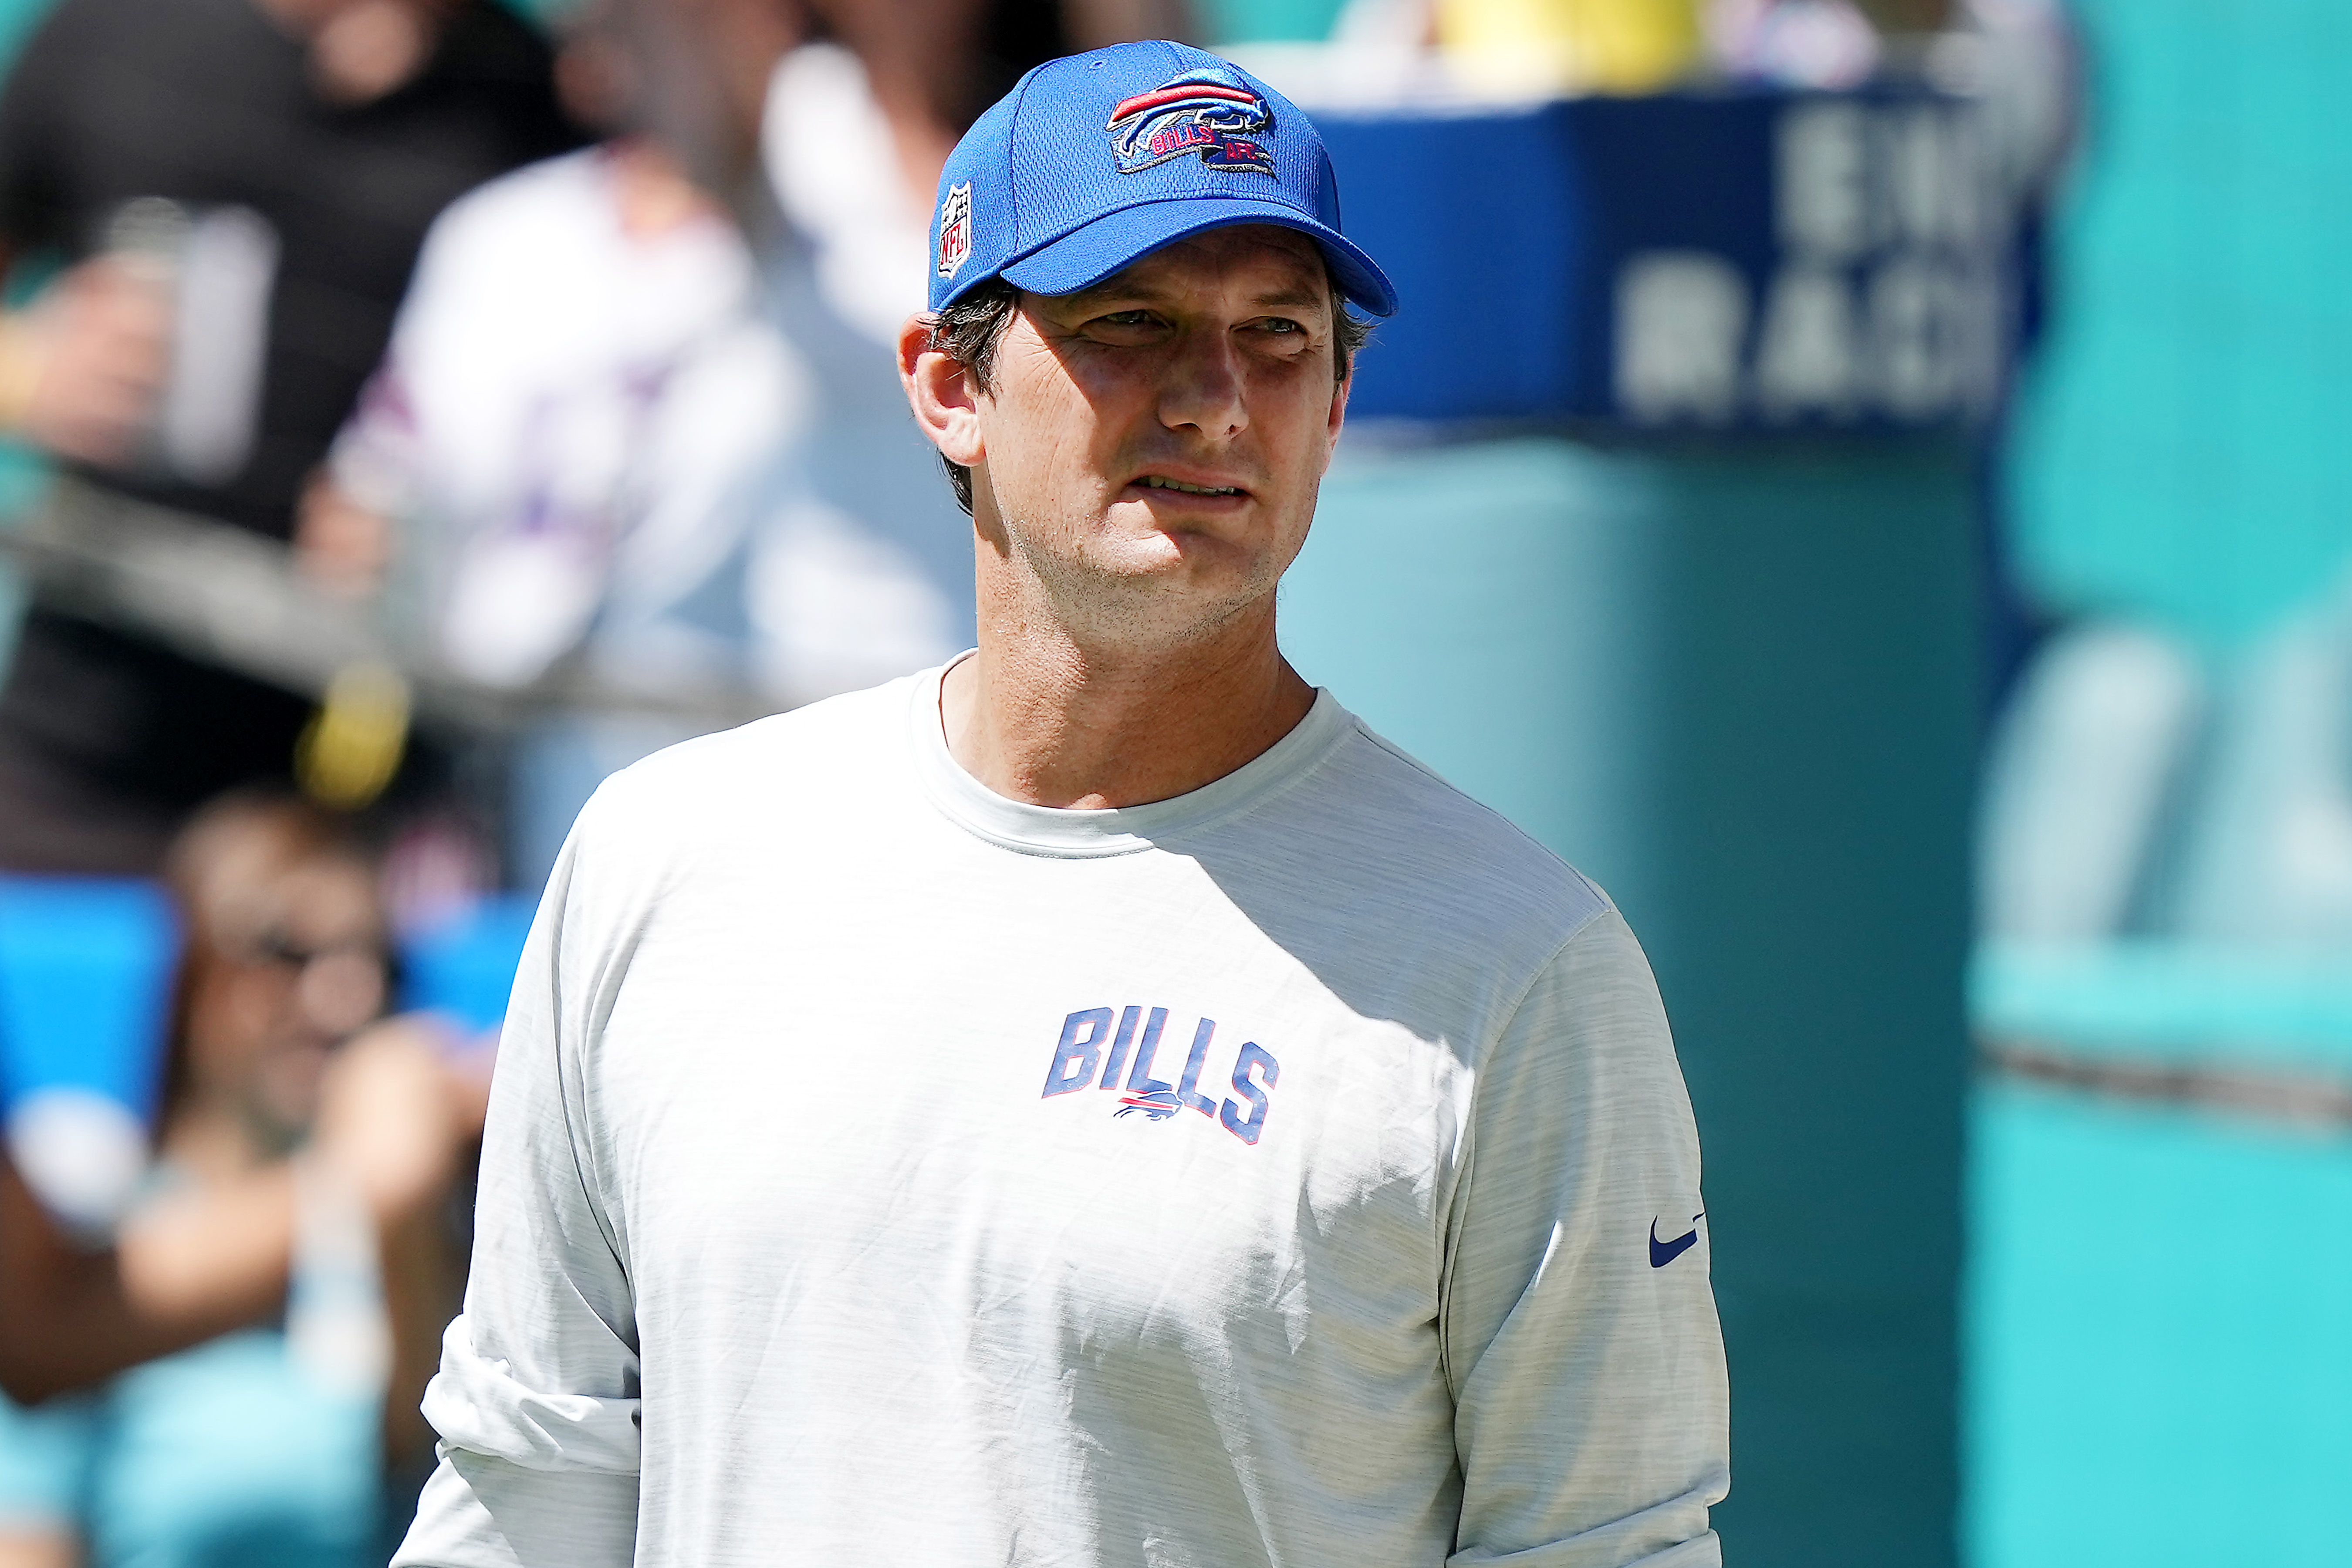 Buffalo Bills offensive coordinator Ken Dorsey looks on during warm ups before the game against the Miami Dolphins at Hard Rock Stadium on September 25, 2022 in Miami Gardens, Florida.